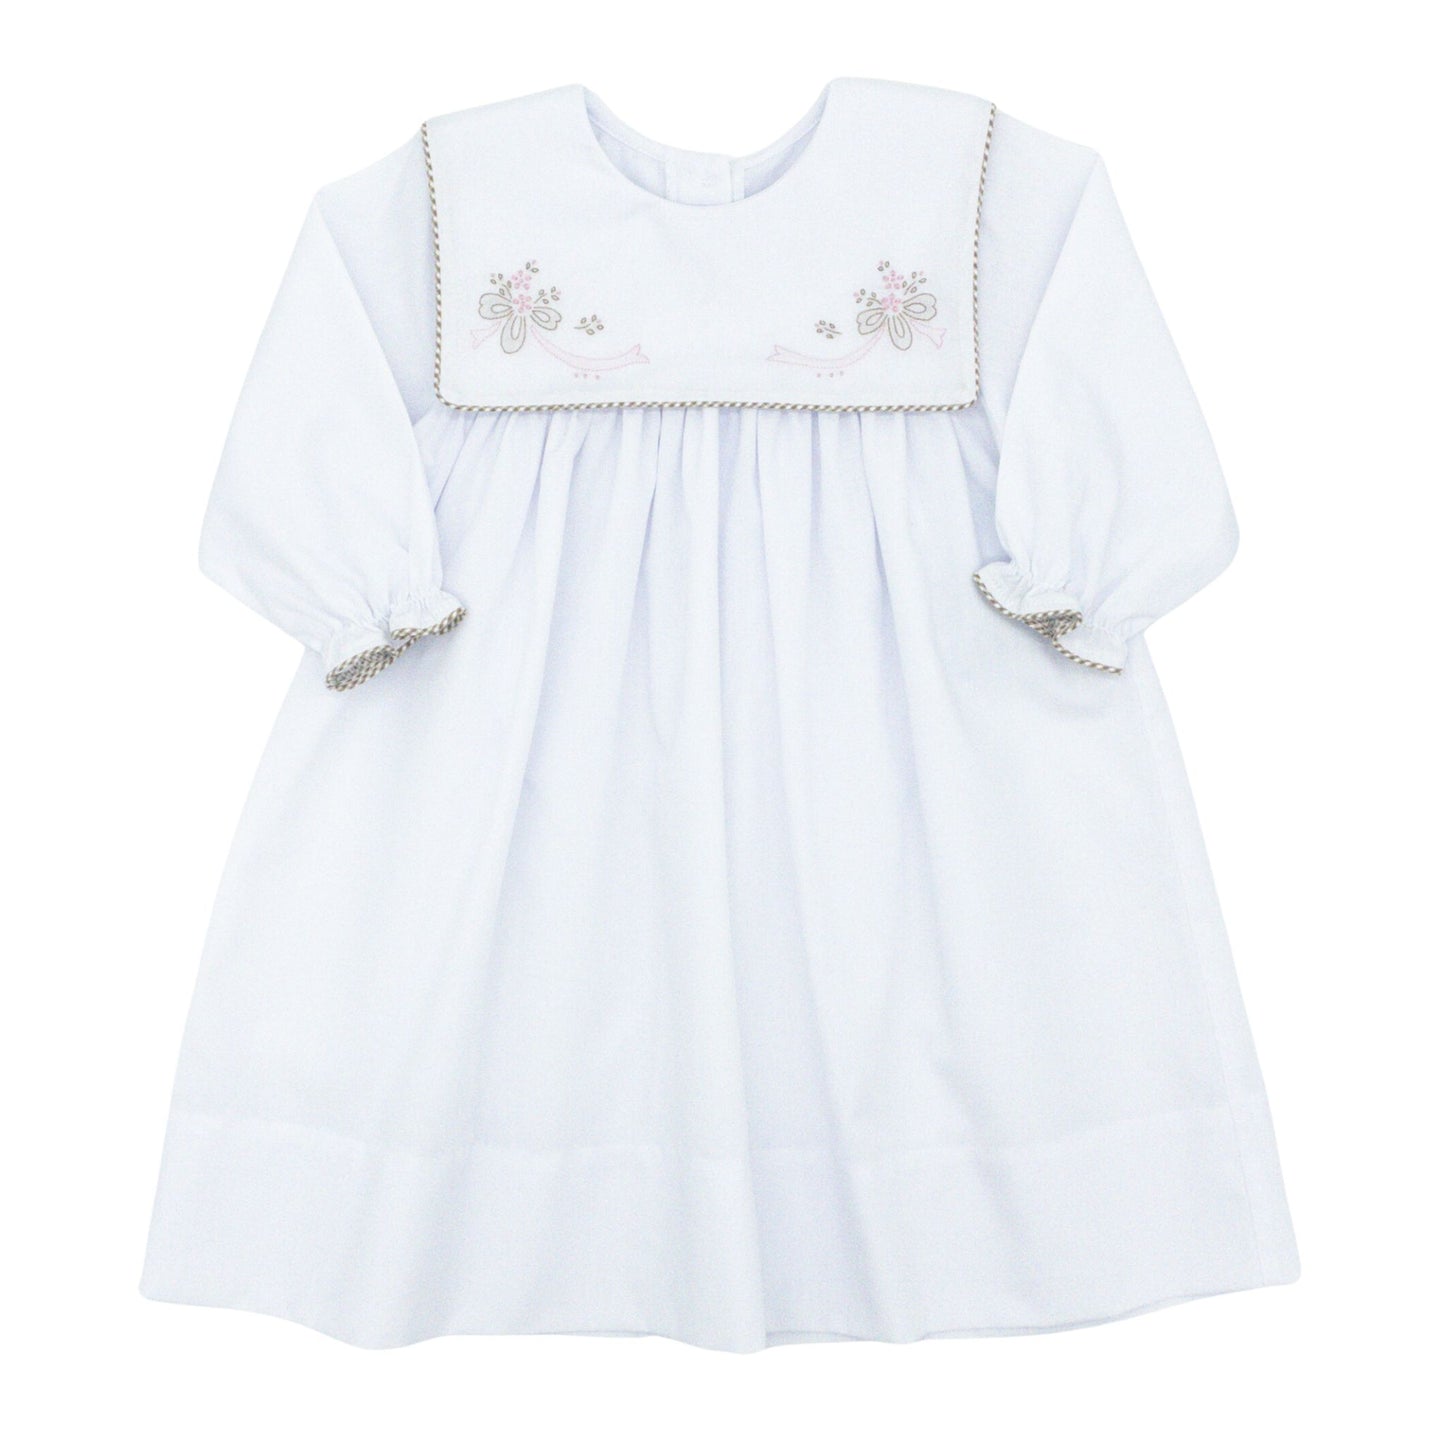 Square Collar Dress with Bouquet Hand Embroidery